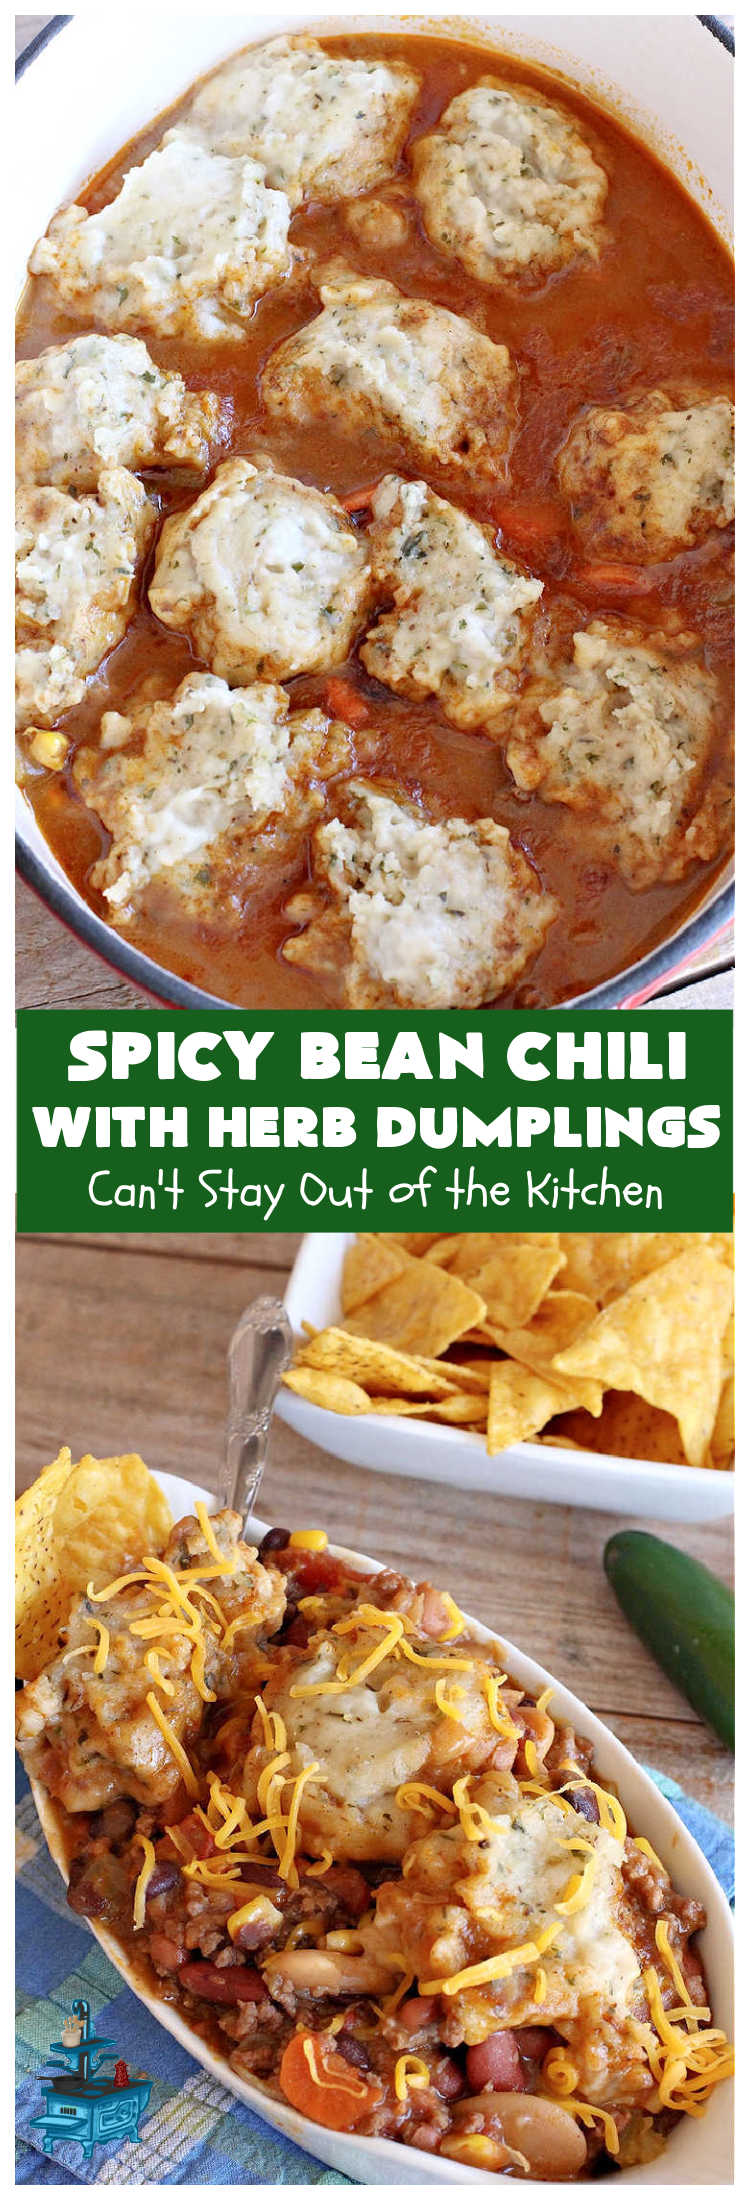 Spicy Bean Chili with Herb Dumplings | Can't Stay Out of the Kitchen | this fantastic #chili #recipe includes 4 kinds of #beans, #ChipotlePeppers in #AdoboSauce & #GreenChilies to make it sizzle. The #HerbDumplings are light & airy & add mouthwatering goodness to every bite. This #GlutenFree entree is wonderful reheated too. #BlackBeans #beef #KidneyBeans #ChiliBeans #corn #dumplings #SpicyBeanChili #SpicyBeanChiliWithHerbDumplings #TexMex